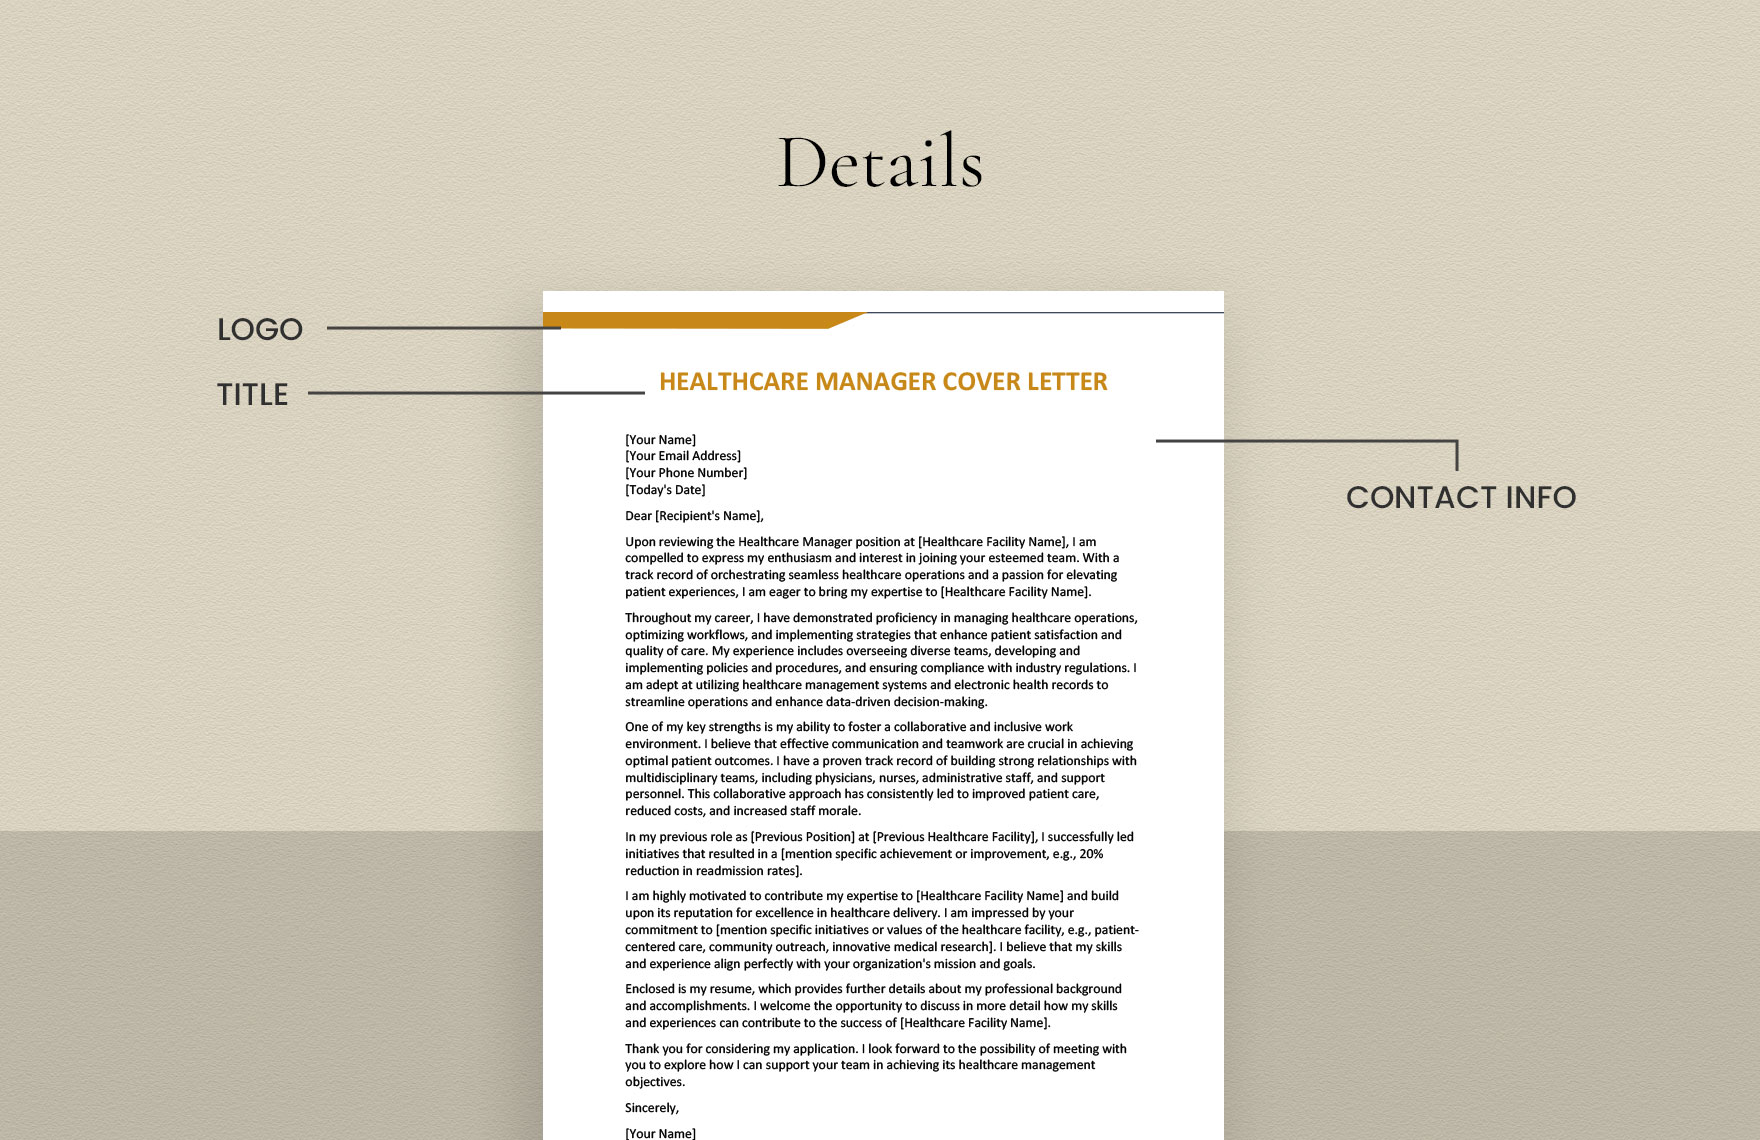 Healthcare Manager Cover Letter